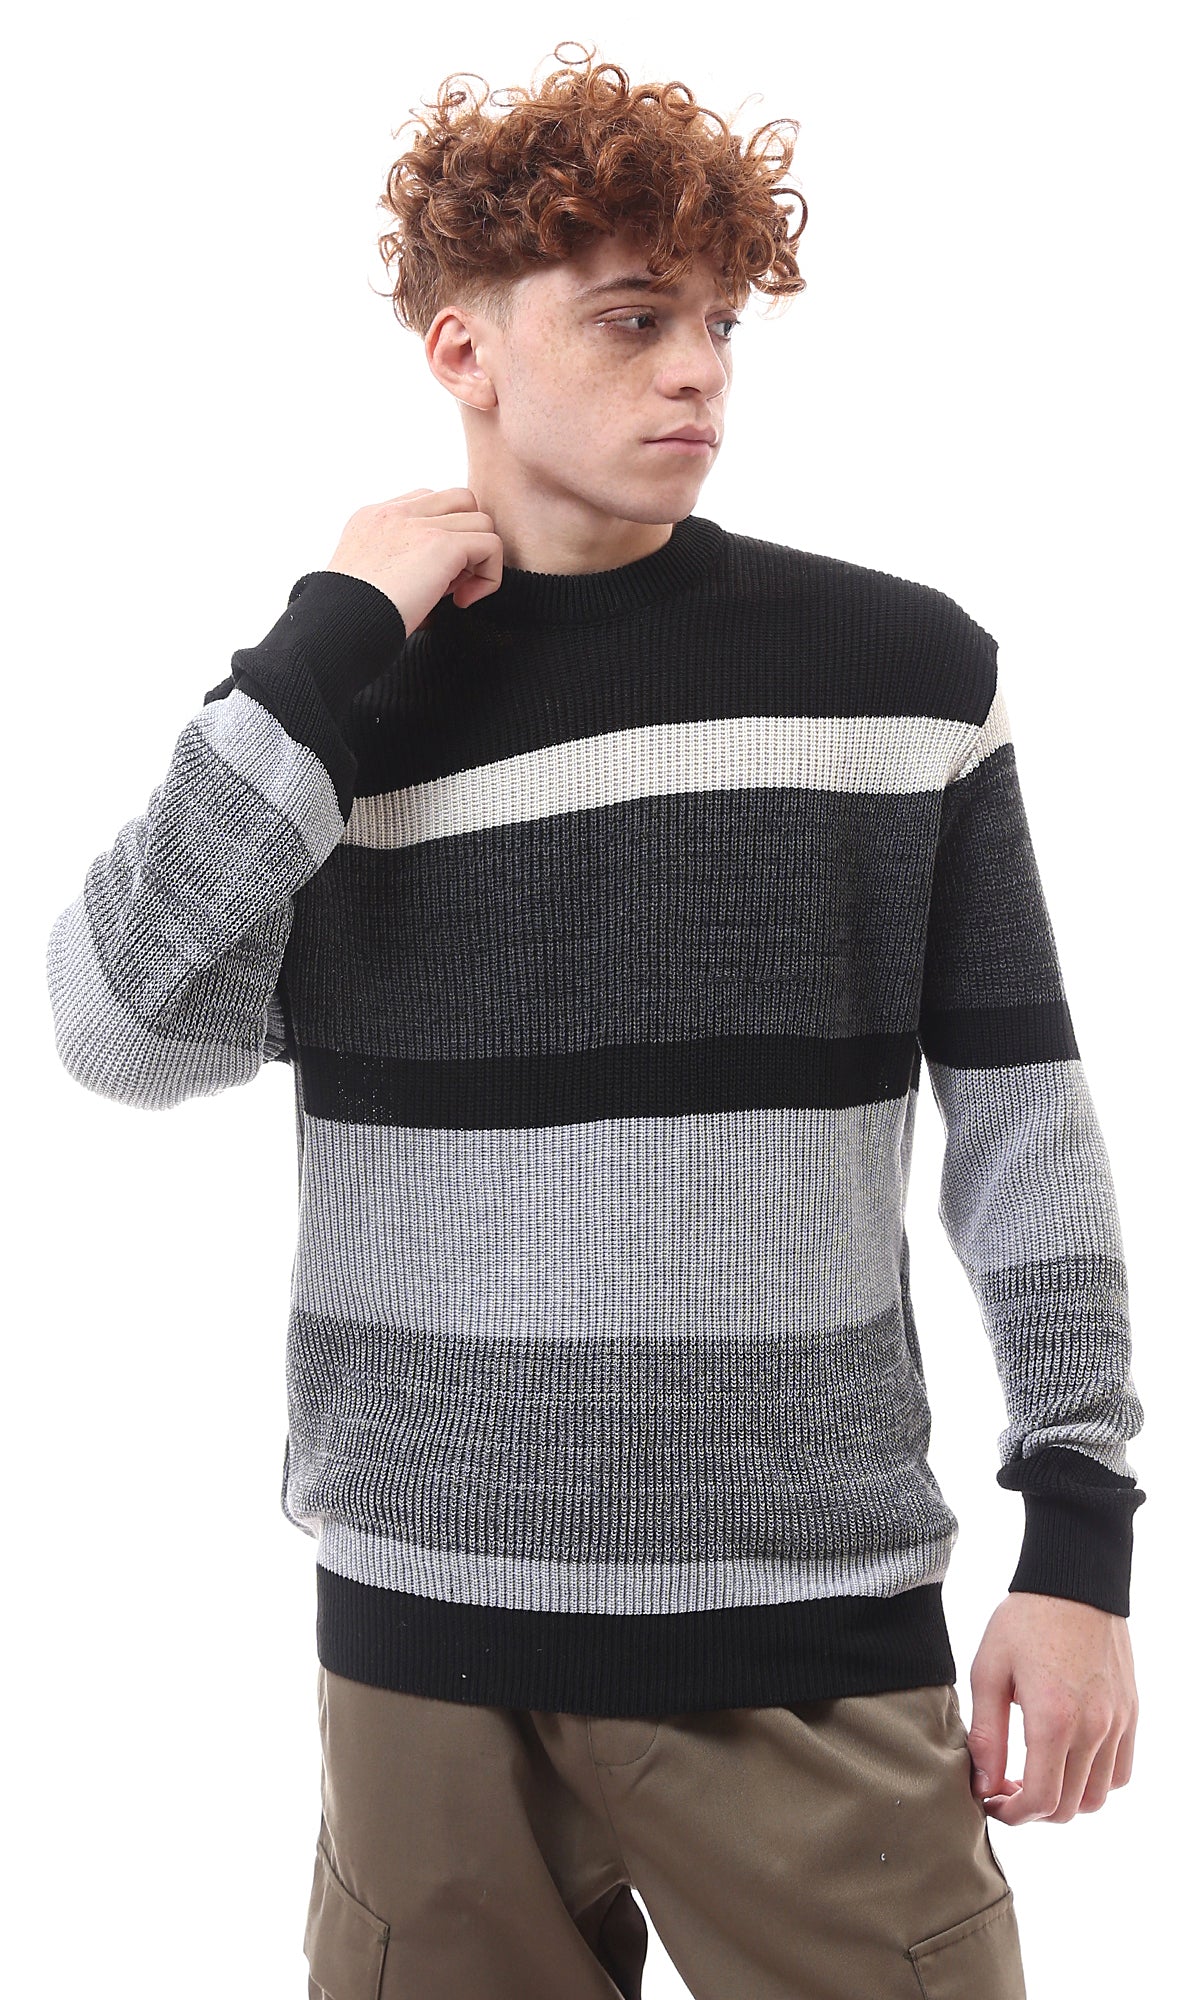 O173598 Heather Grey & Black Knitted Slip On Pullover